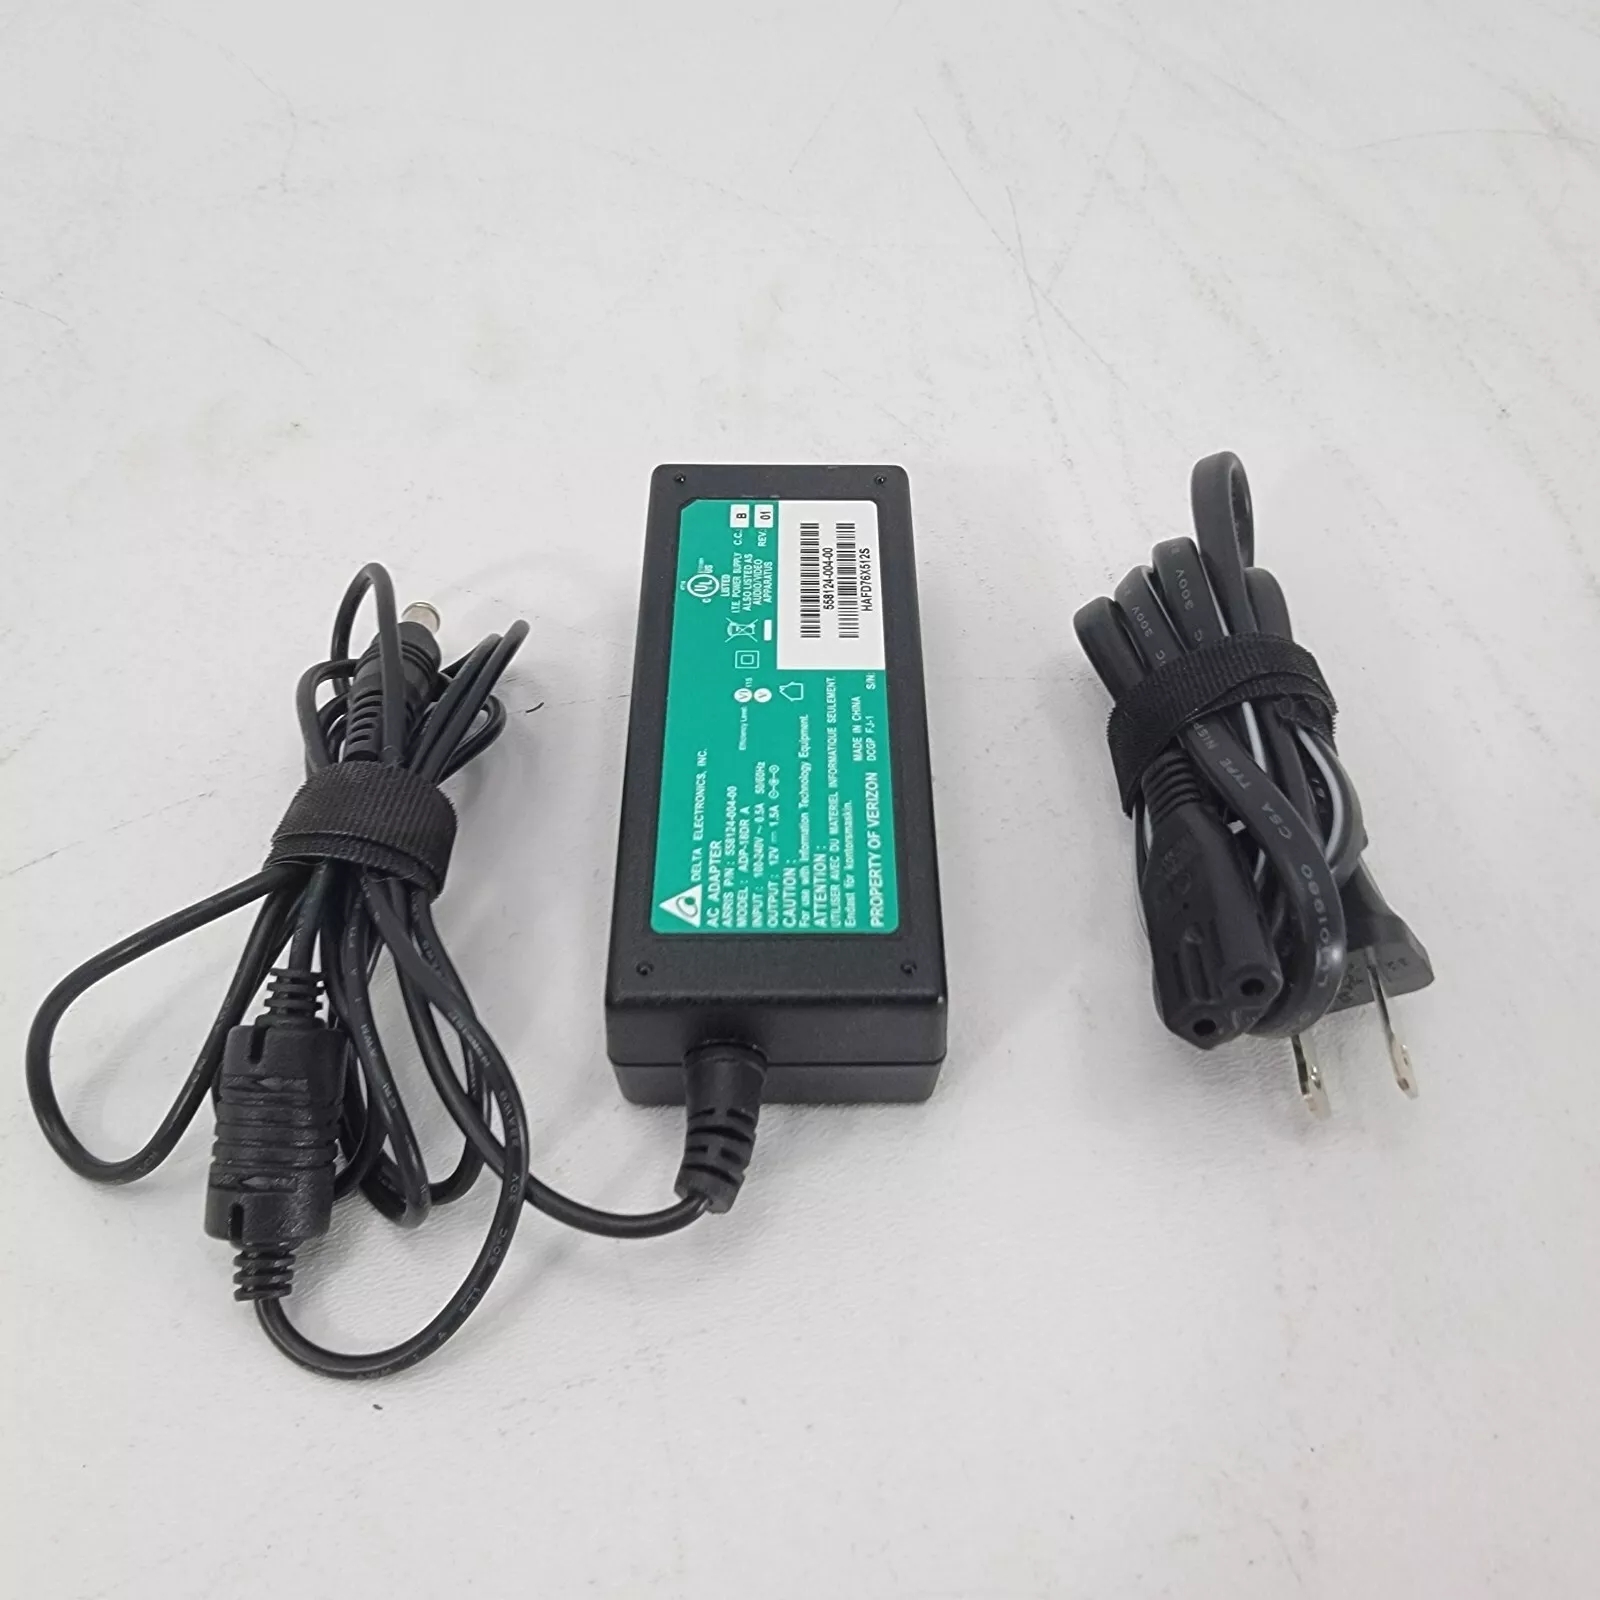 *Brand NEW*Genuine Delta ADP-18DR A 12V 1.5A 18W AC Adapter 558124-004-00 Power Supply